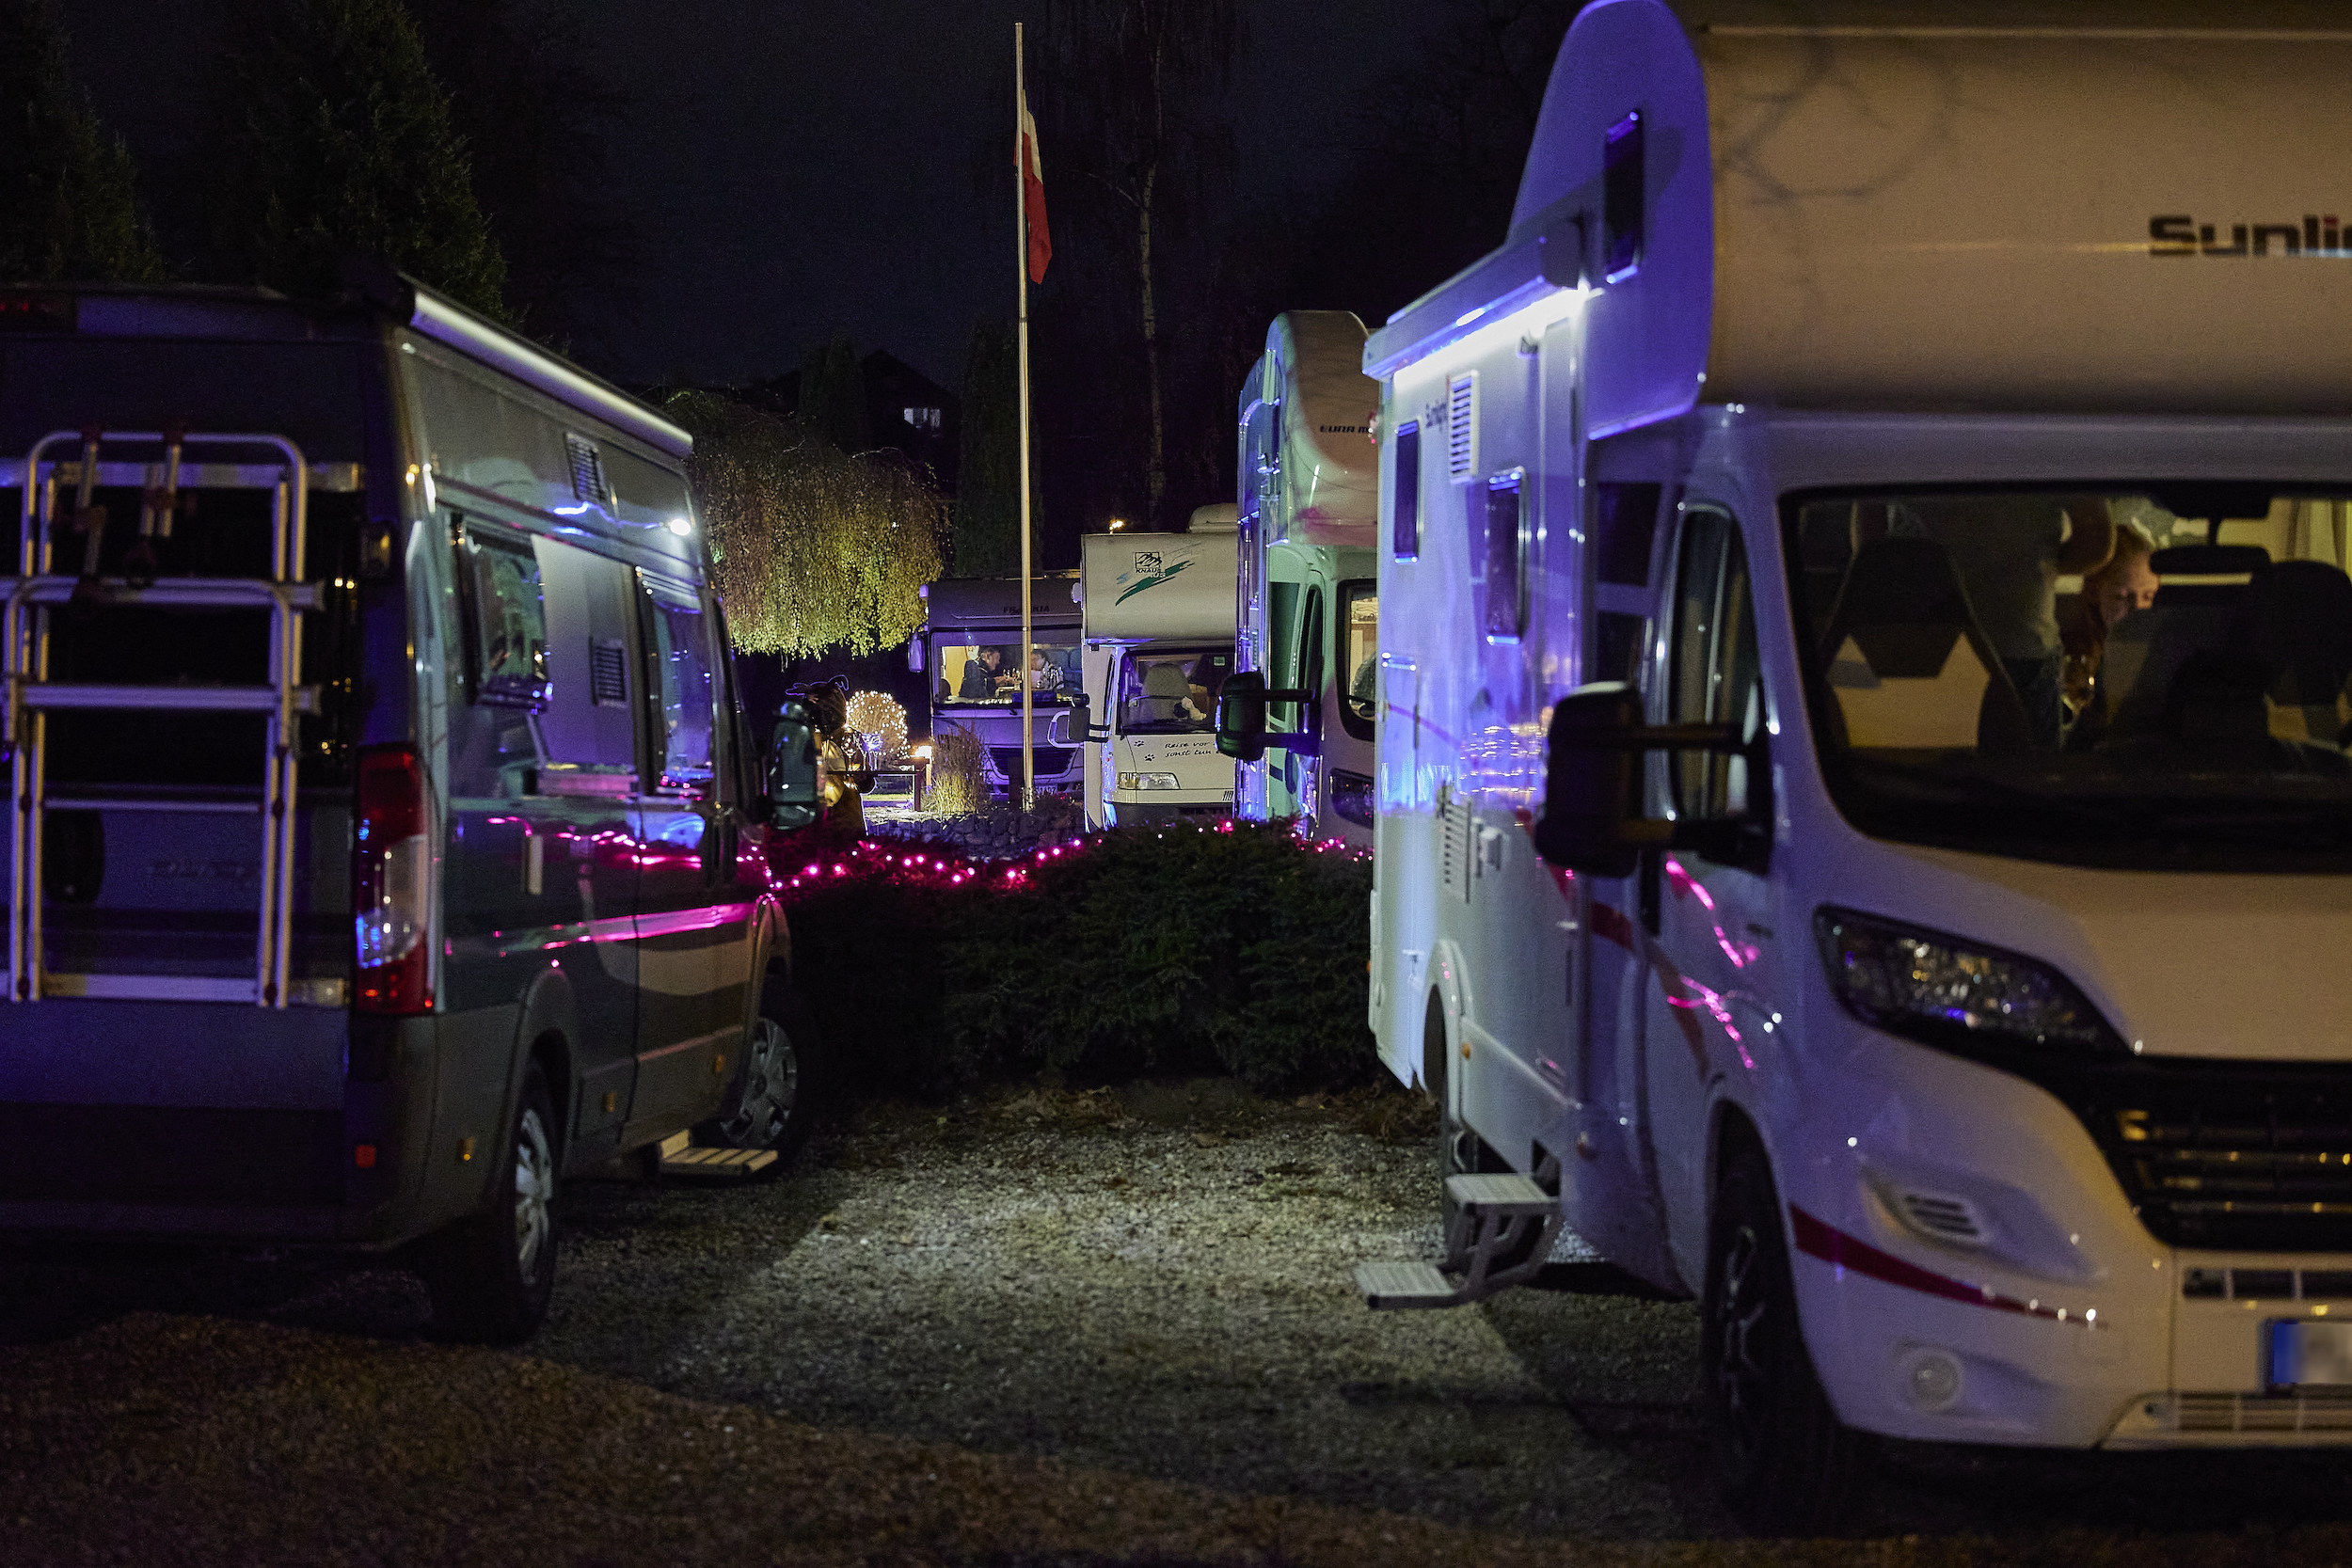 Parked Recreational vehicles (RV) are seen in the parking lot of the Kochschule Neumuenster cooking school